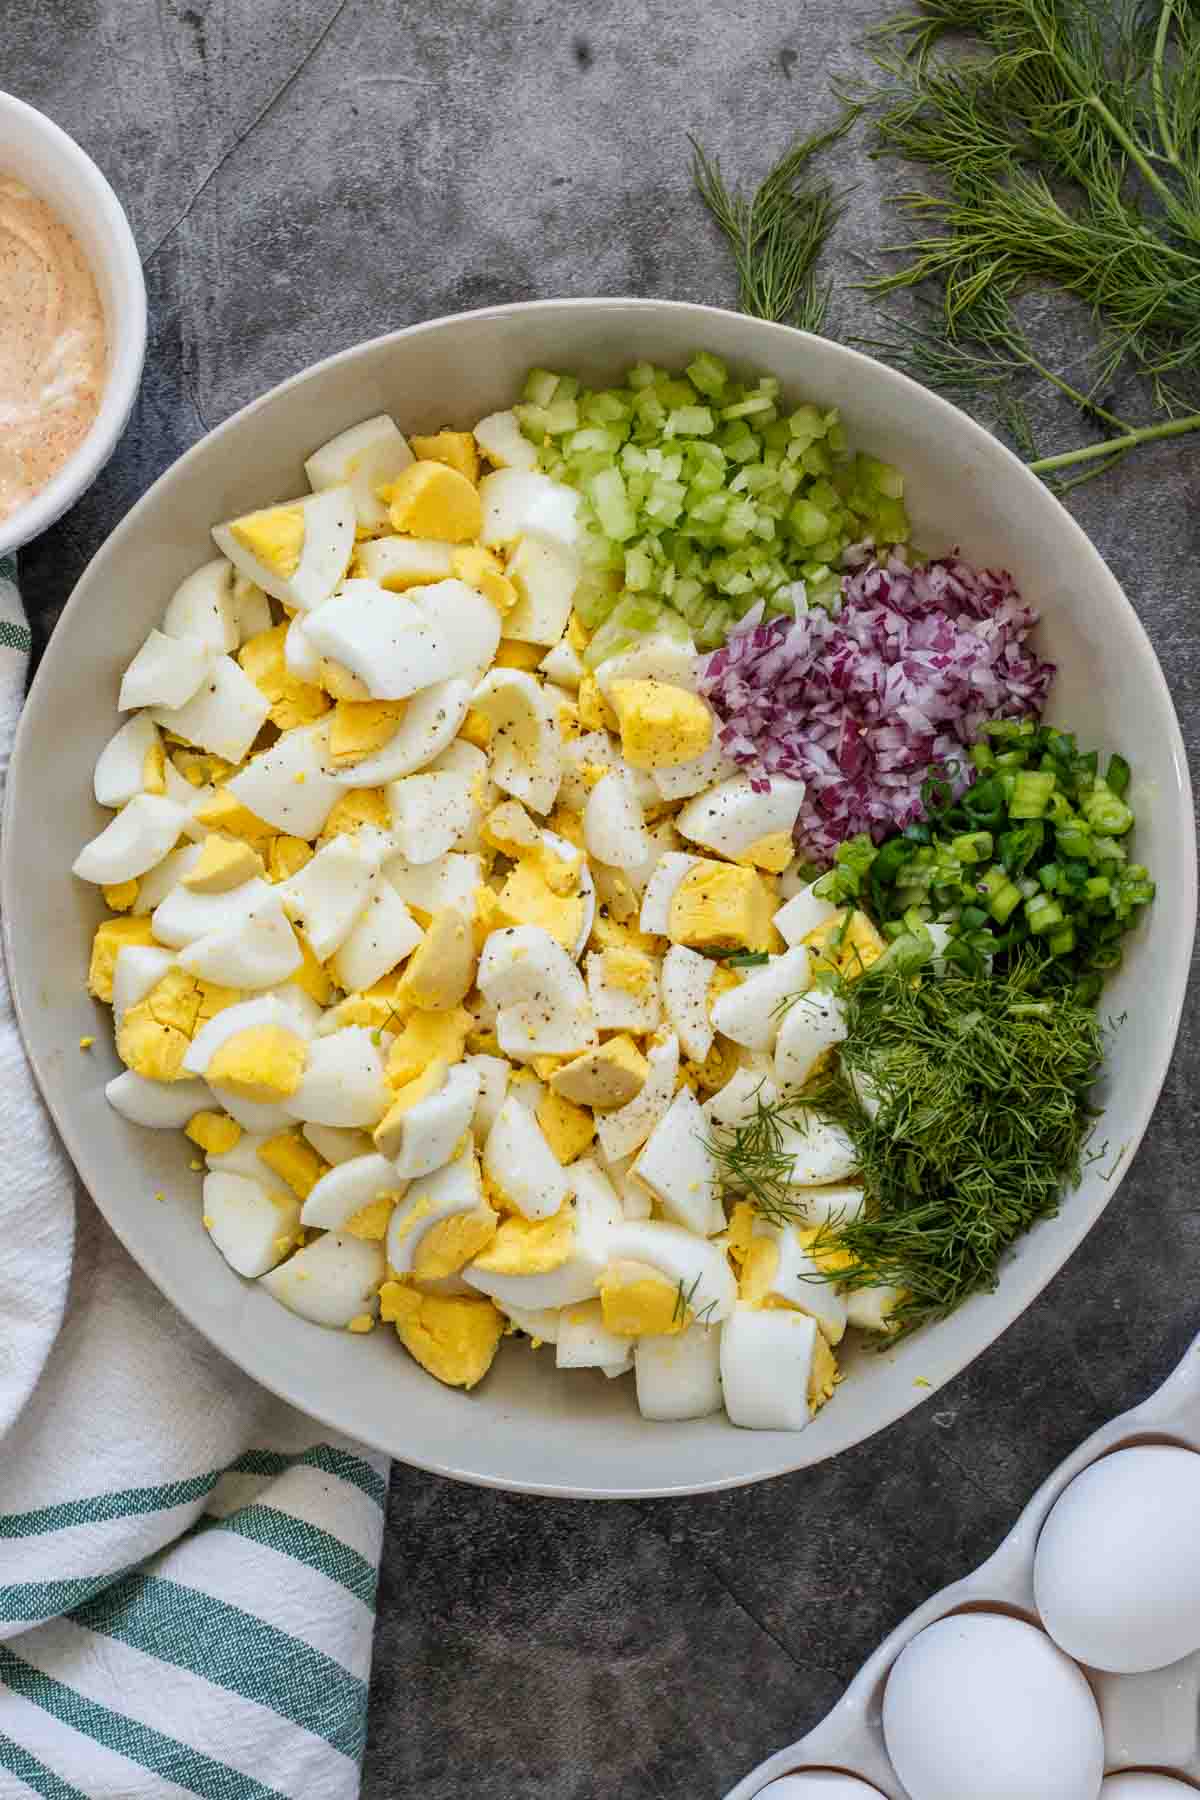 Egg salad ingredients in a gray bowl unmixed. 